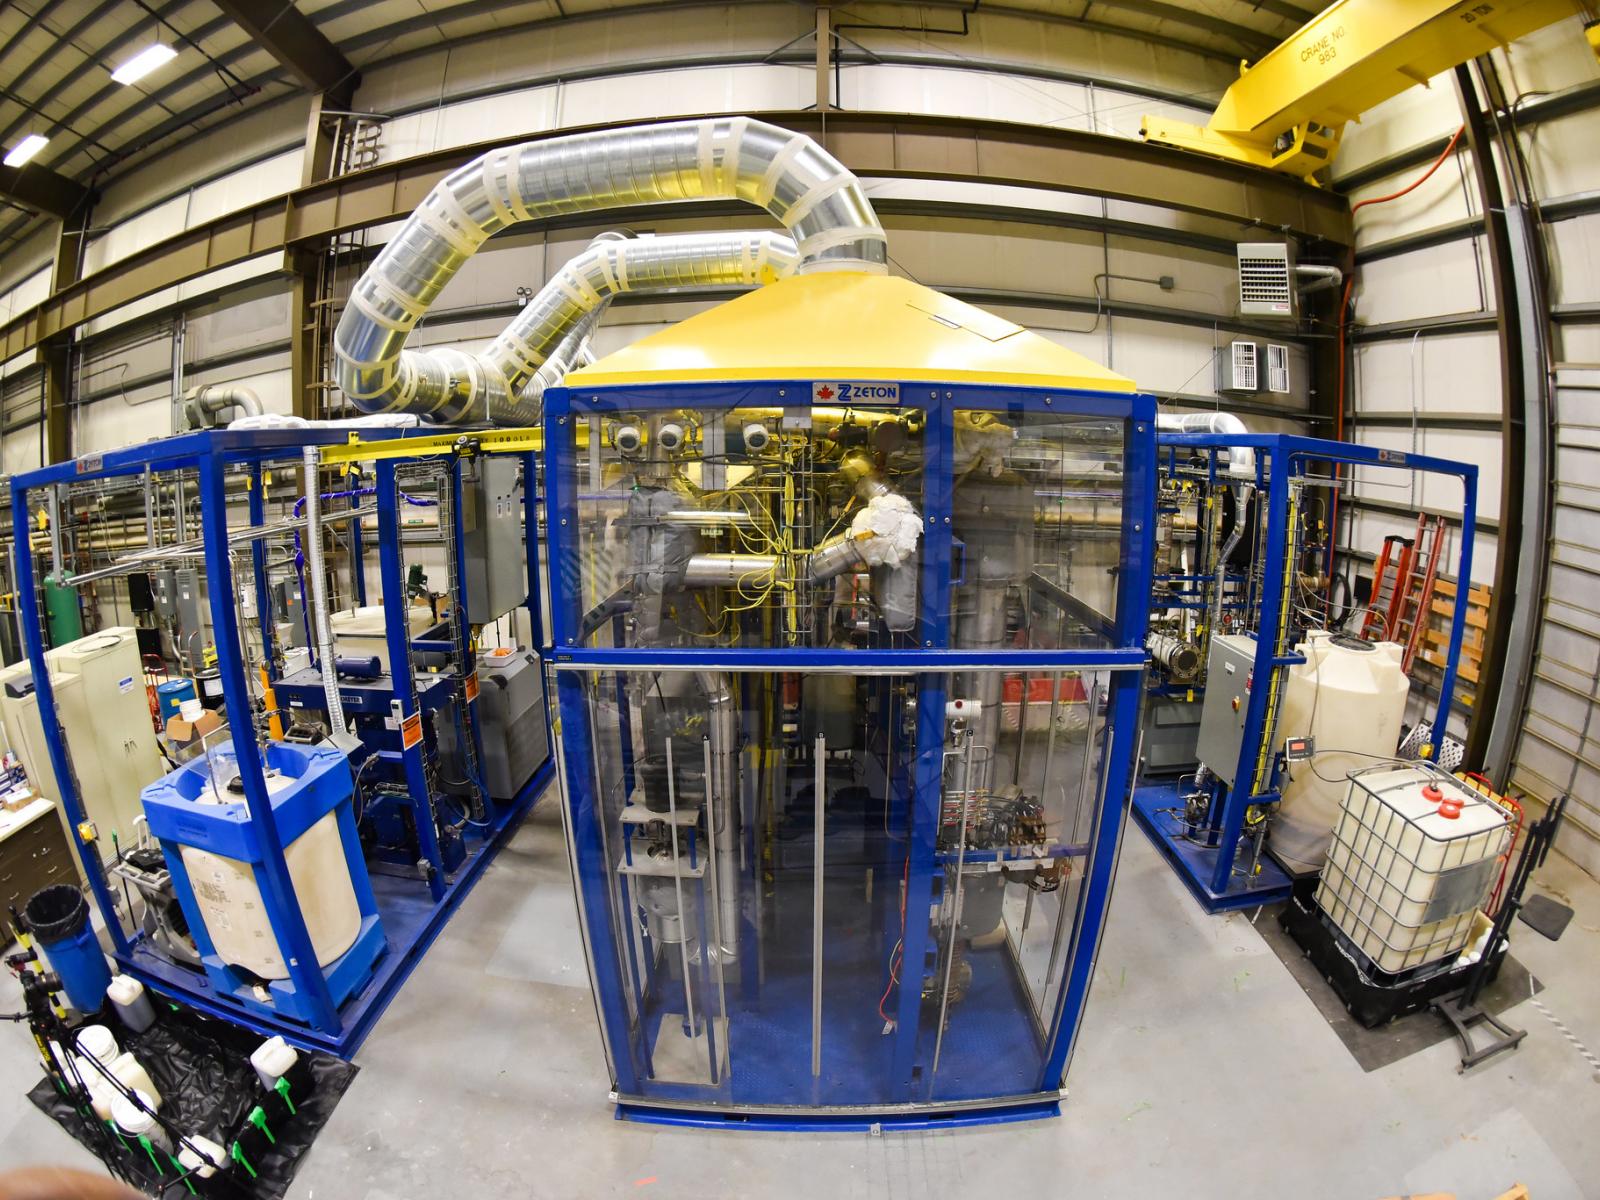 Photo of the Modular Hydrothermal Liquefaction System at PNNL